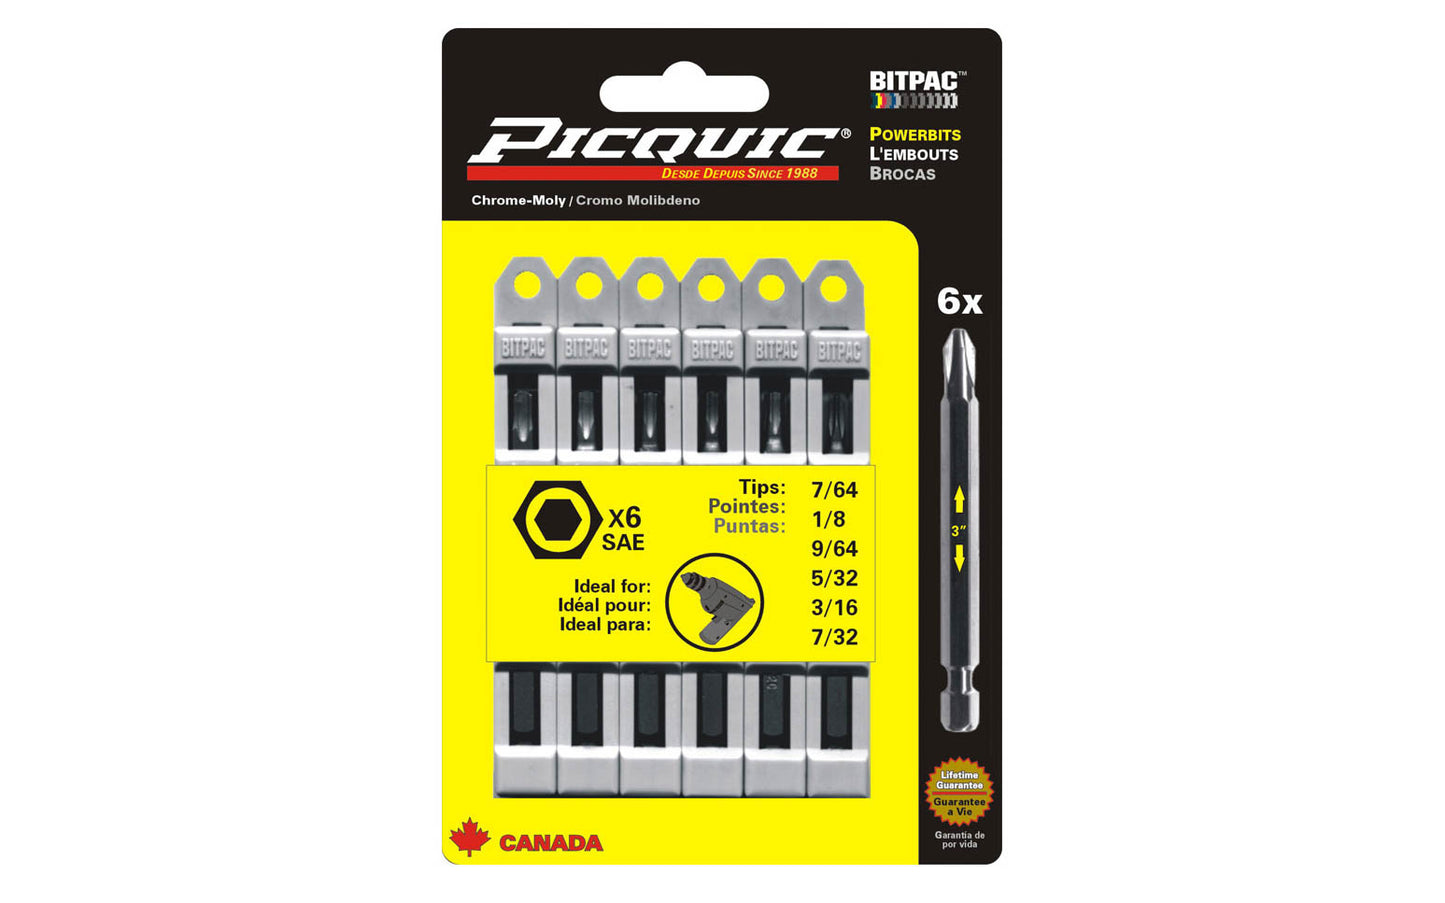 Picquic 6-piece SAE Allen Key Powerbit Set with sizes 7/64", 1/8", 9/64", 5/32", 3/16", 7/32"  SAE Allen Key drive bits. Replacement bits for Picquic screwdrivers & also good for use in drills & impact drivers. 1/4” hex ball power shank. 057369950019